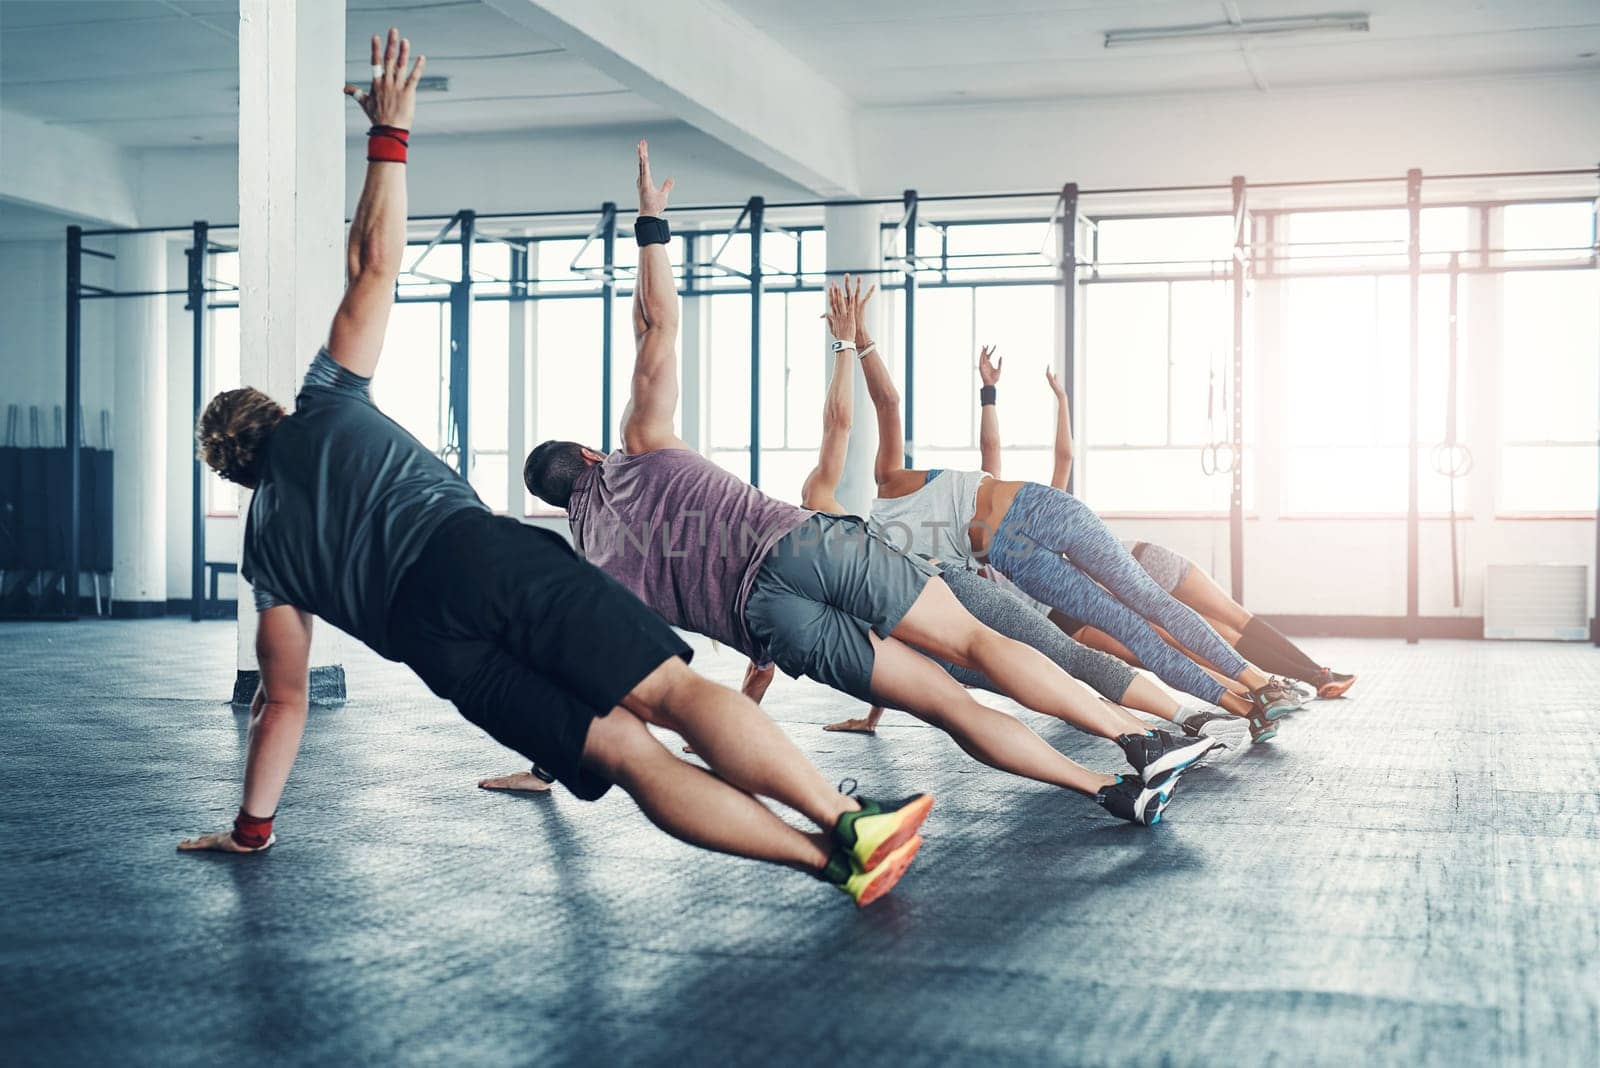 Fitness, group class and athletes doing a exercise in the gym for health, wellness and flexibility. Sports, training and people doing side plank exercise challenge together in sport studio or center